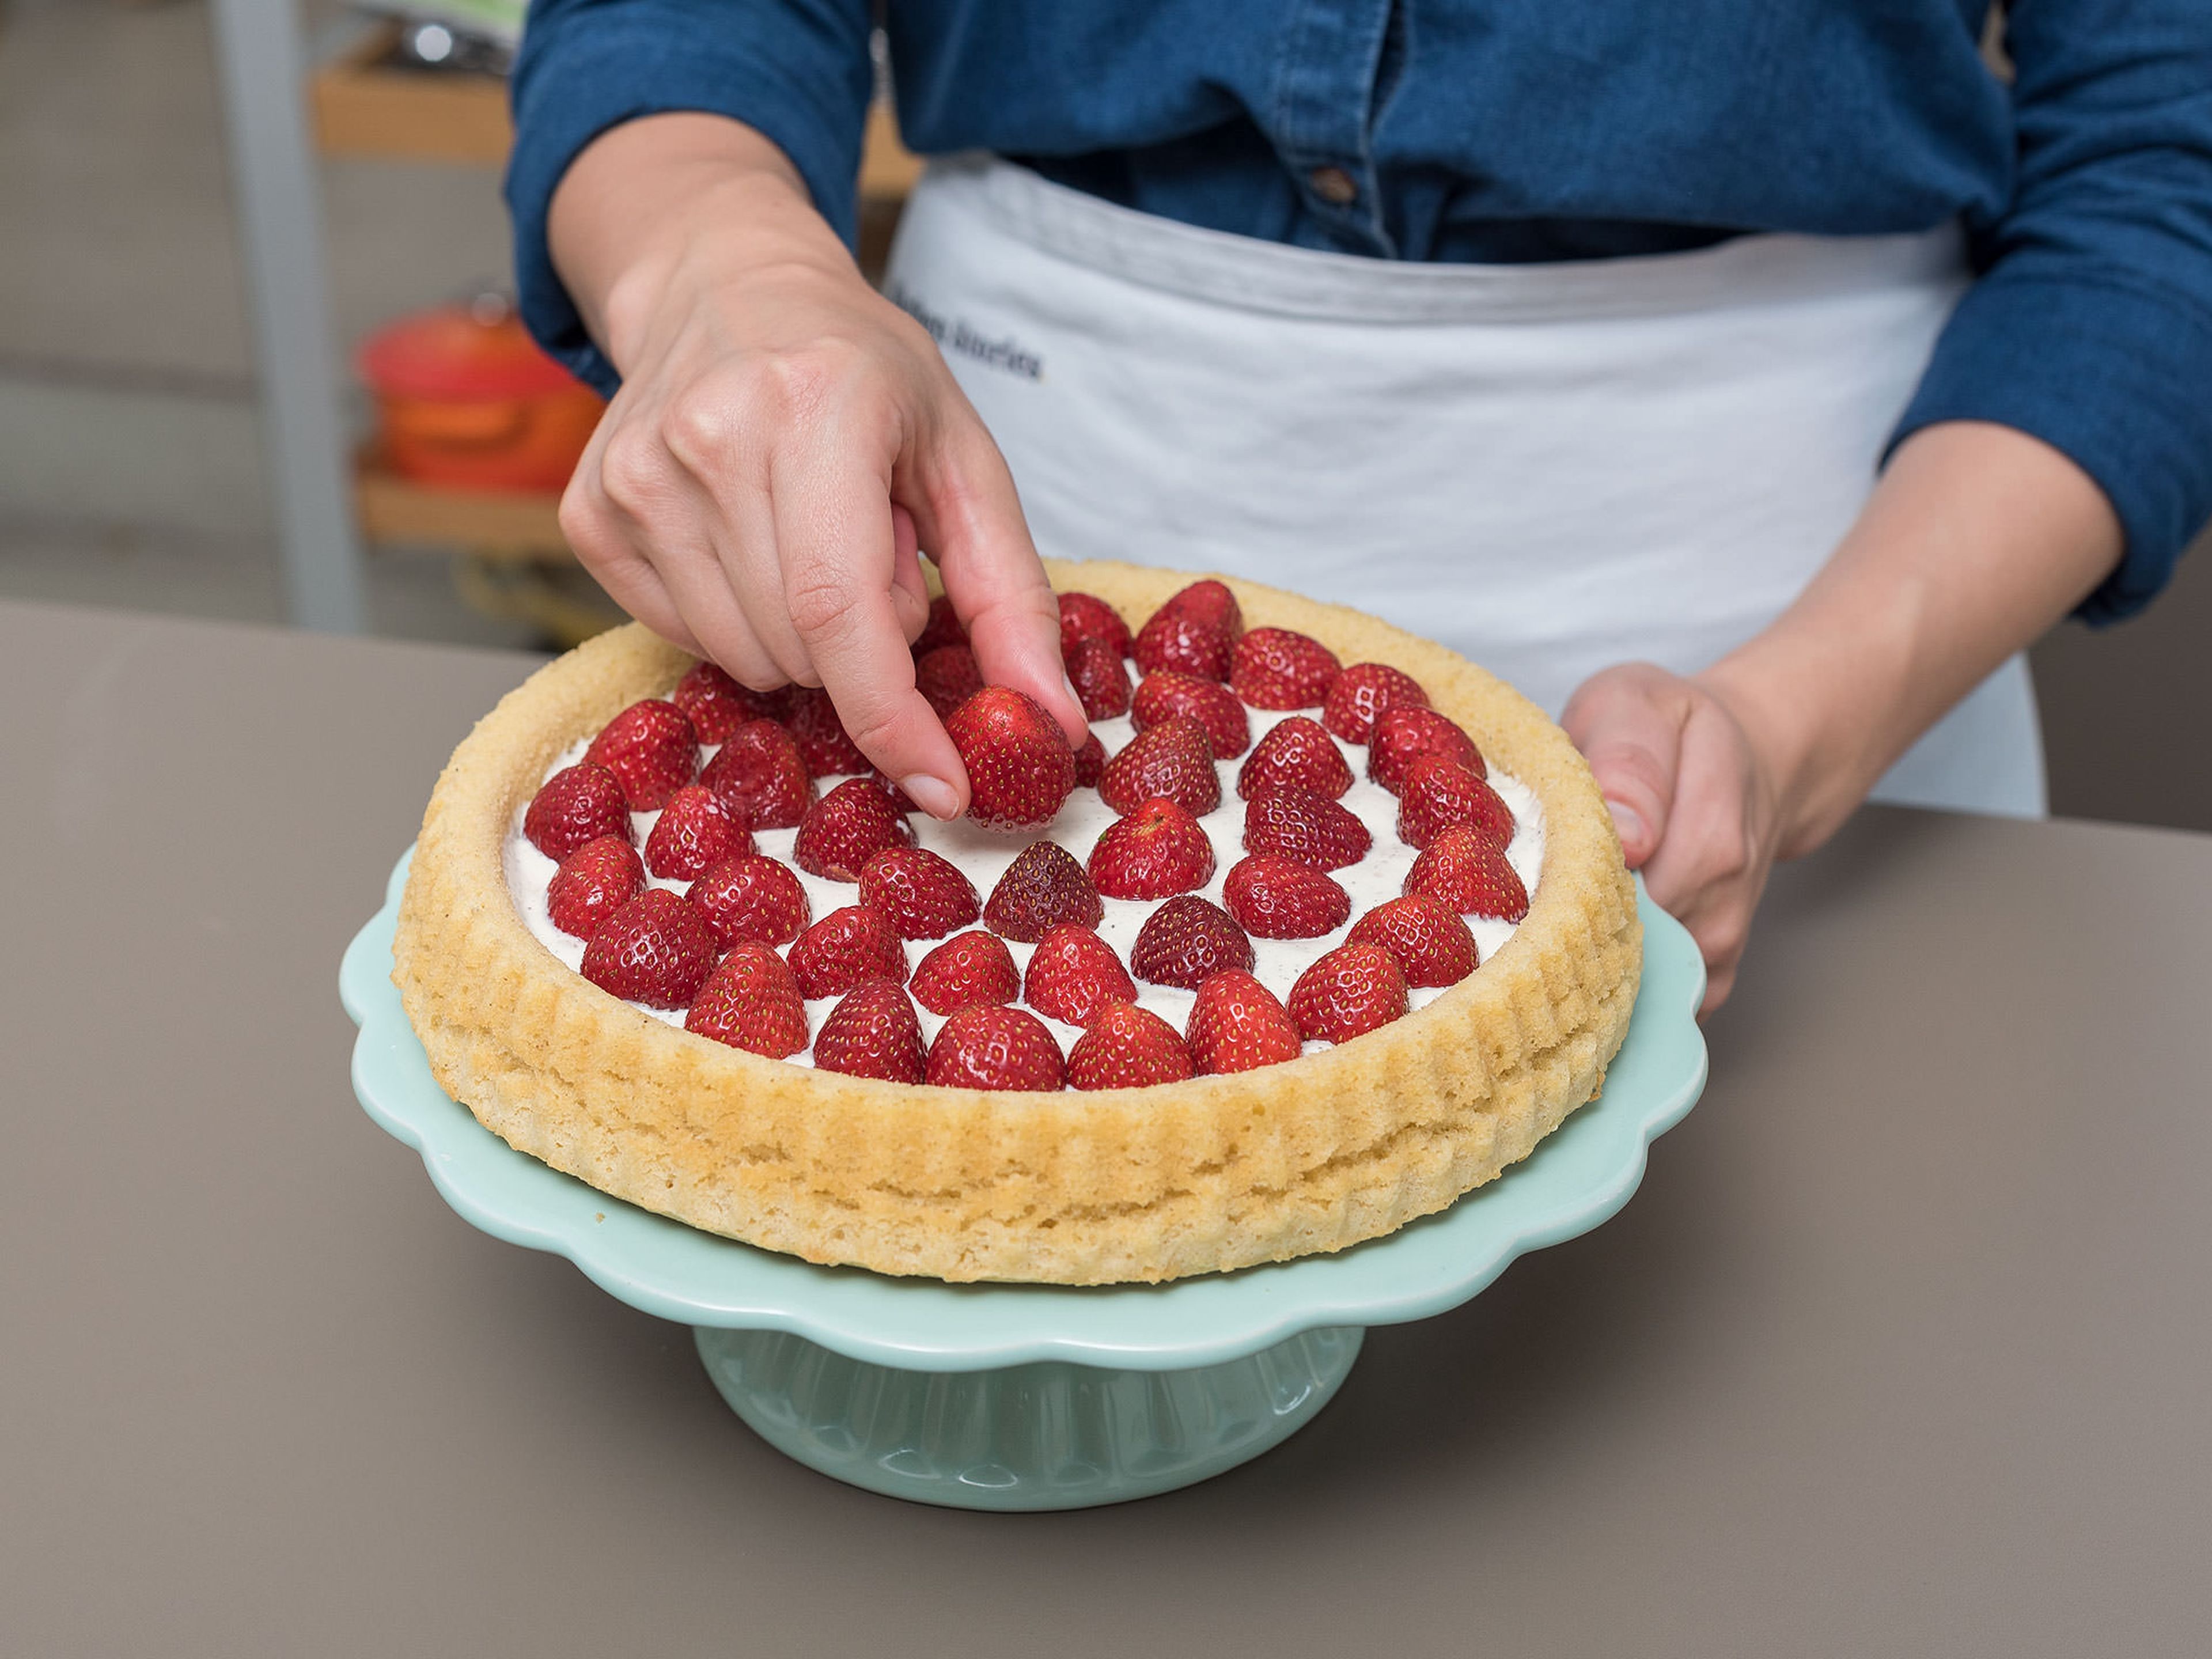 Place a plate over the cooled baking pan and invert the cake onto the plate. Spread the mascarpone mixture over the cake and place the strawberries on top. Sprinkle with toasted, sliced almonds and decorate with mint leaves. Slice and enjoy!